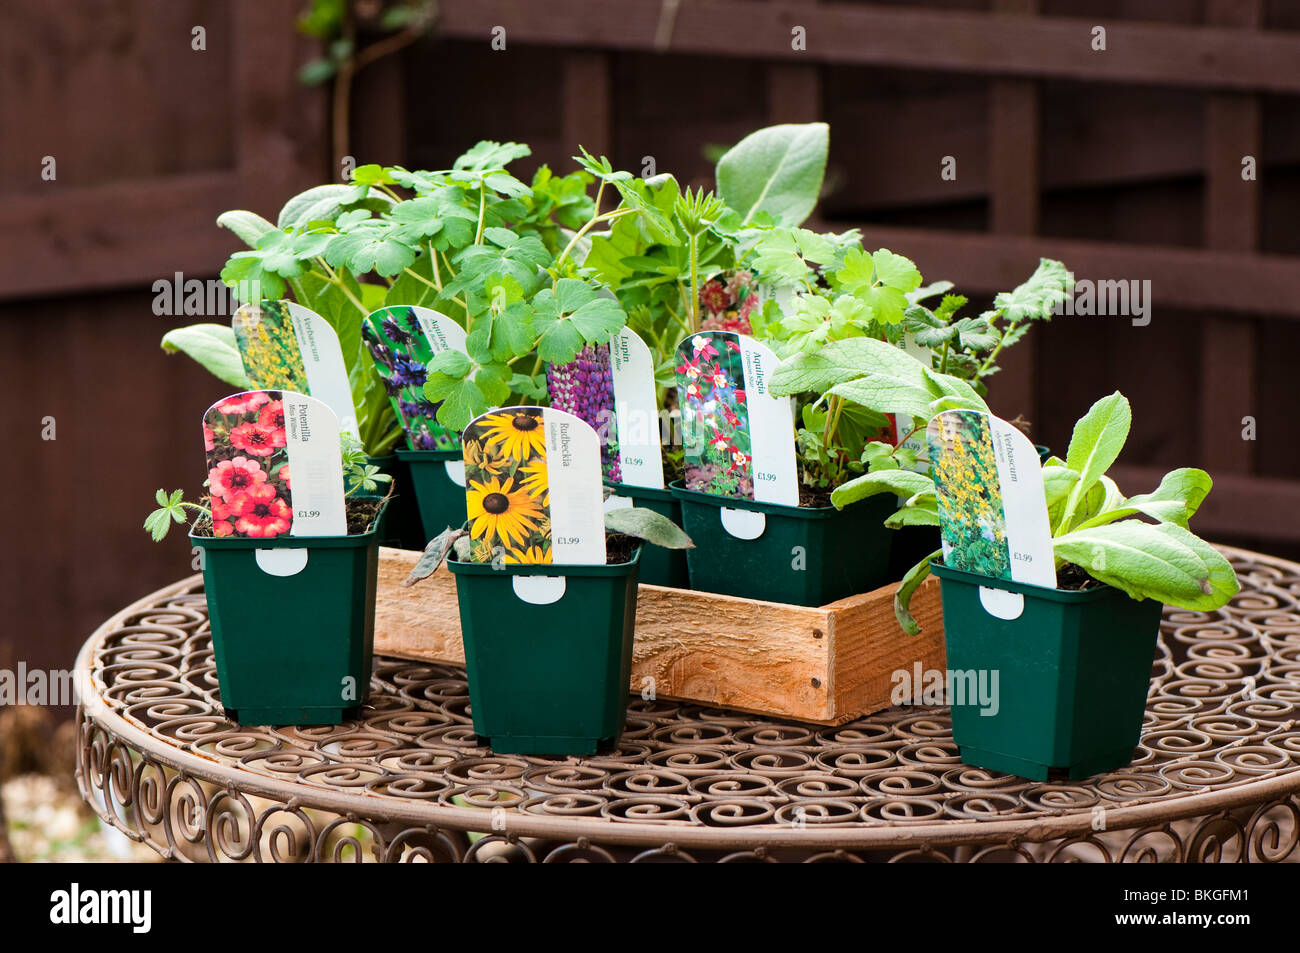 Selection of nursery grown herbaceous plants in pots in a wooden tray ready to plant out in the garden Stock Photo